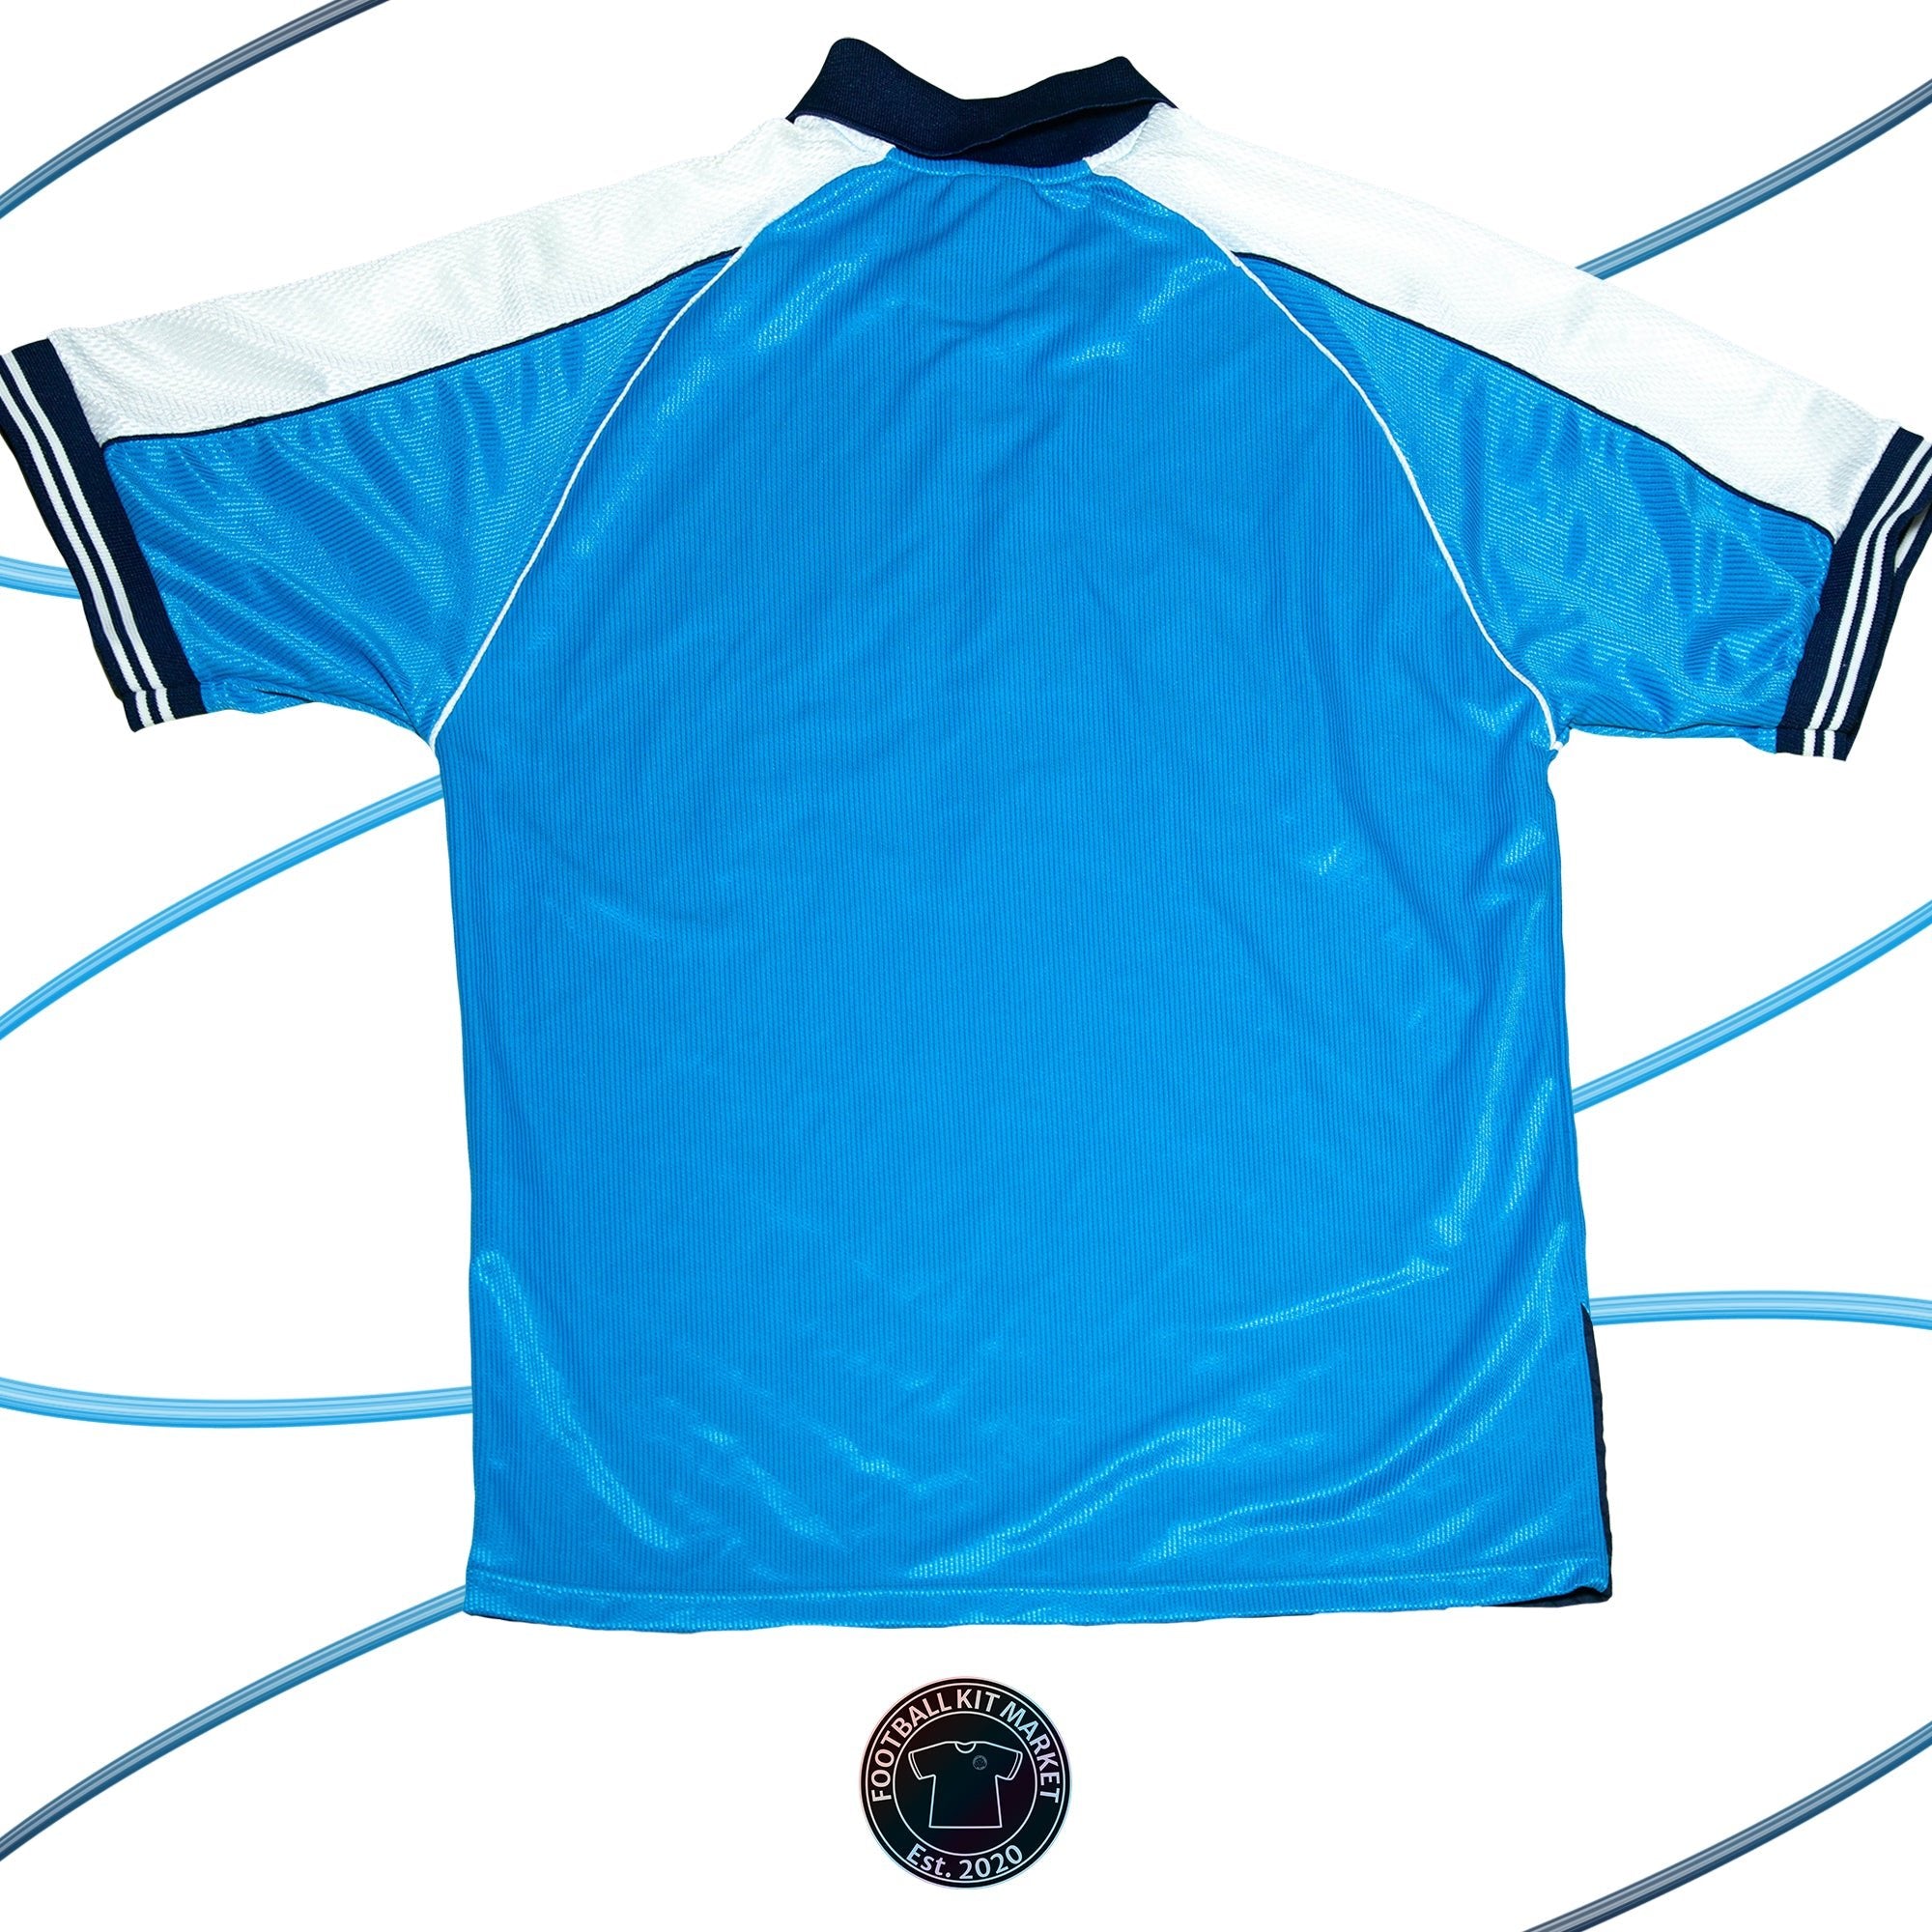 Genuine MANCHESTER CITY Home (1999-2001) - LE COQ SPORTIF (M) - Product Image from Football Kit Market